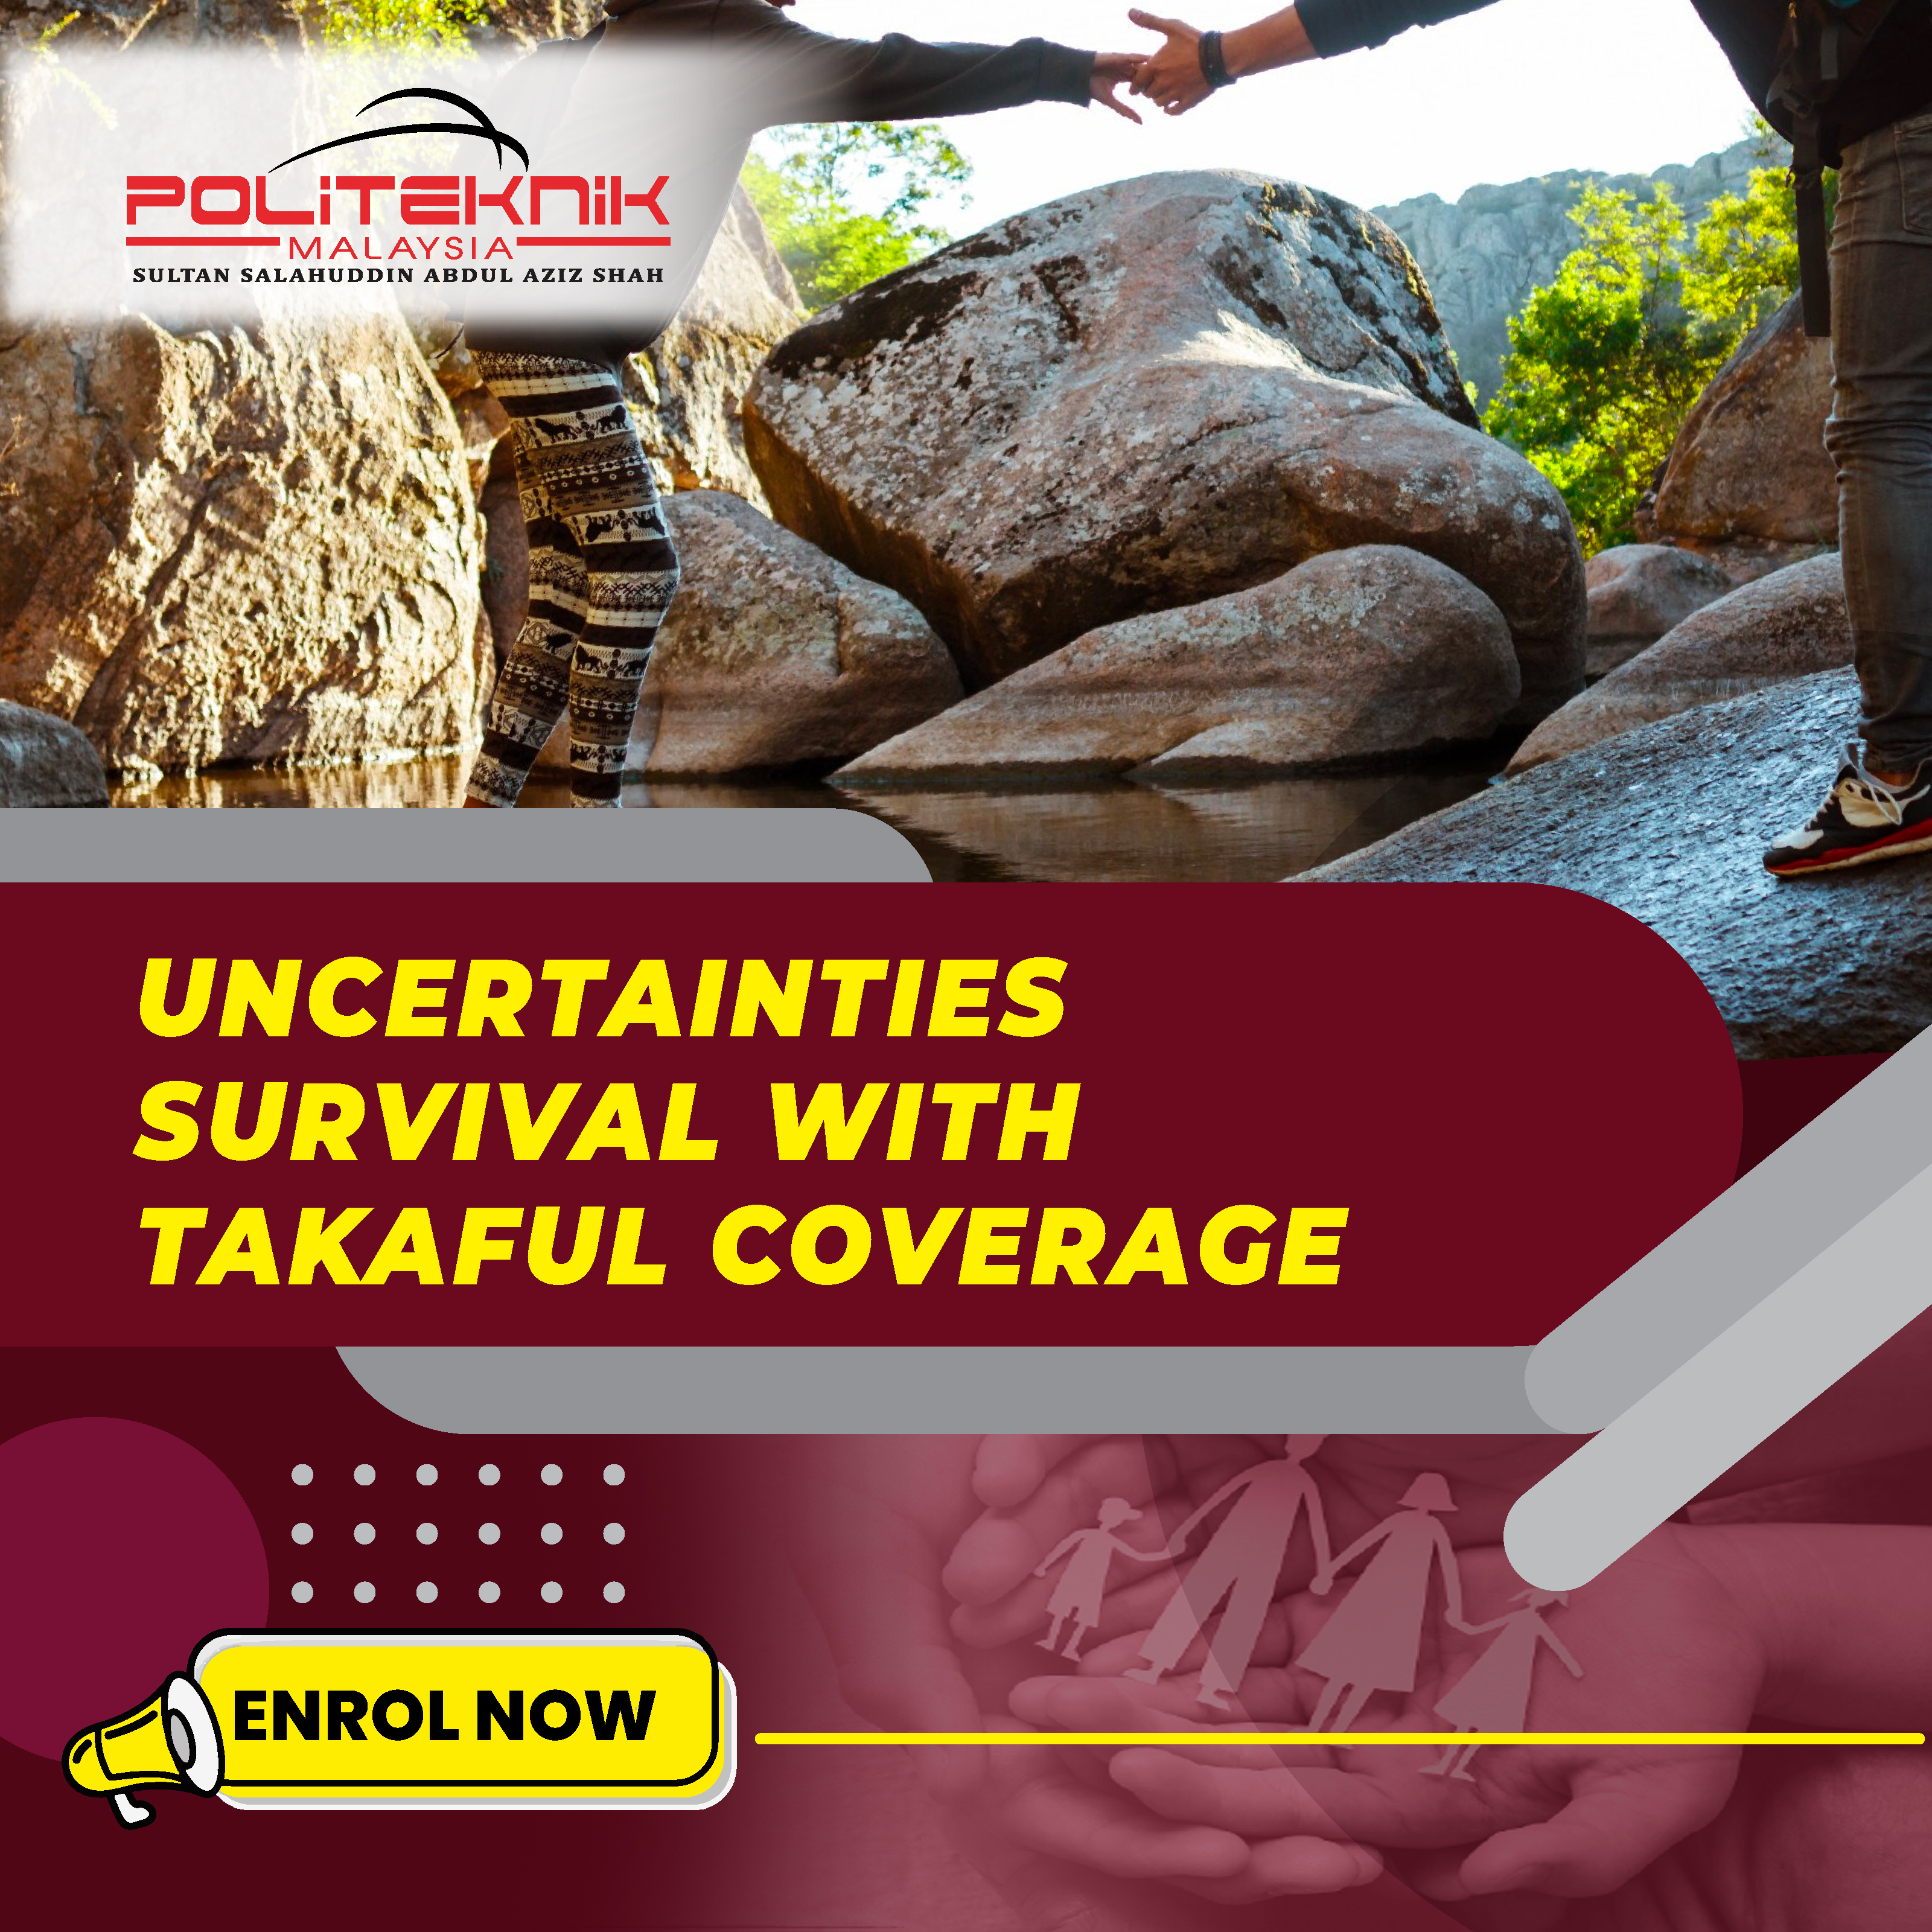 UNCERTAINTIES SURVIVAL WITH TAKAFUL COVERAGE